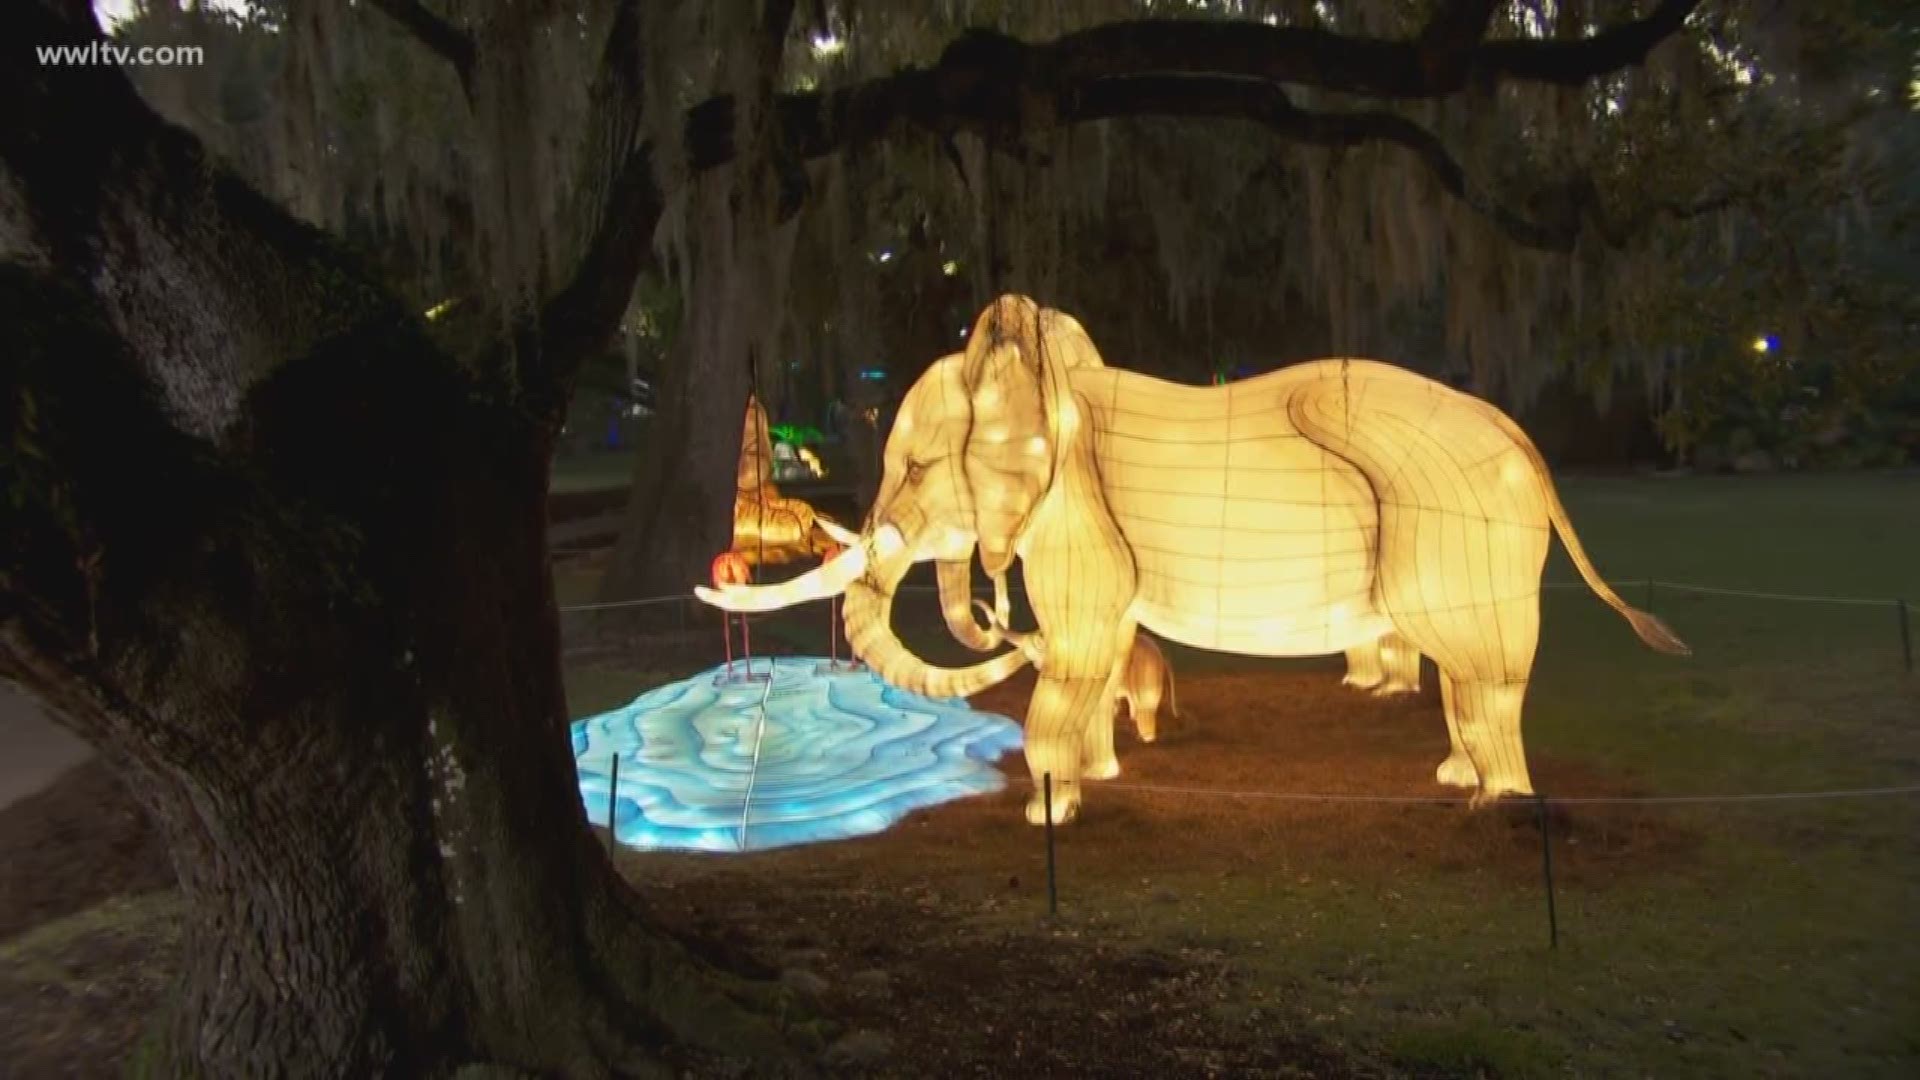 Audubon Zoo Lights is scheduled to run from Nov. 23, the Friday after Thanksgiving, through Dec. 30 and will be open to the public for a $15 admission fee, which will be discounted to $10 for Audubon members.